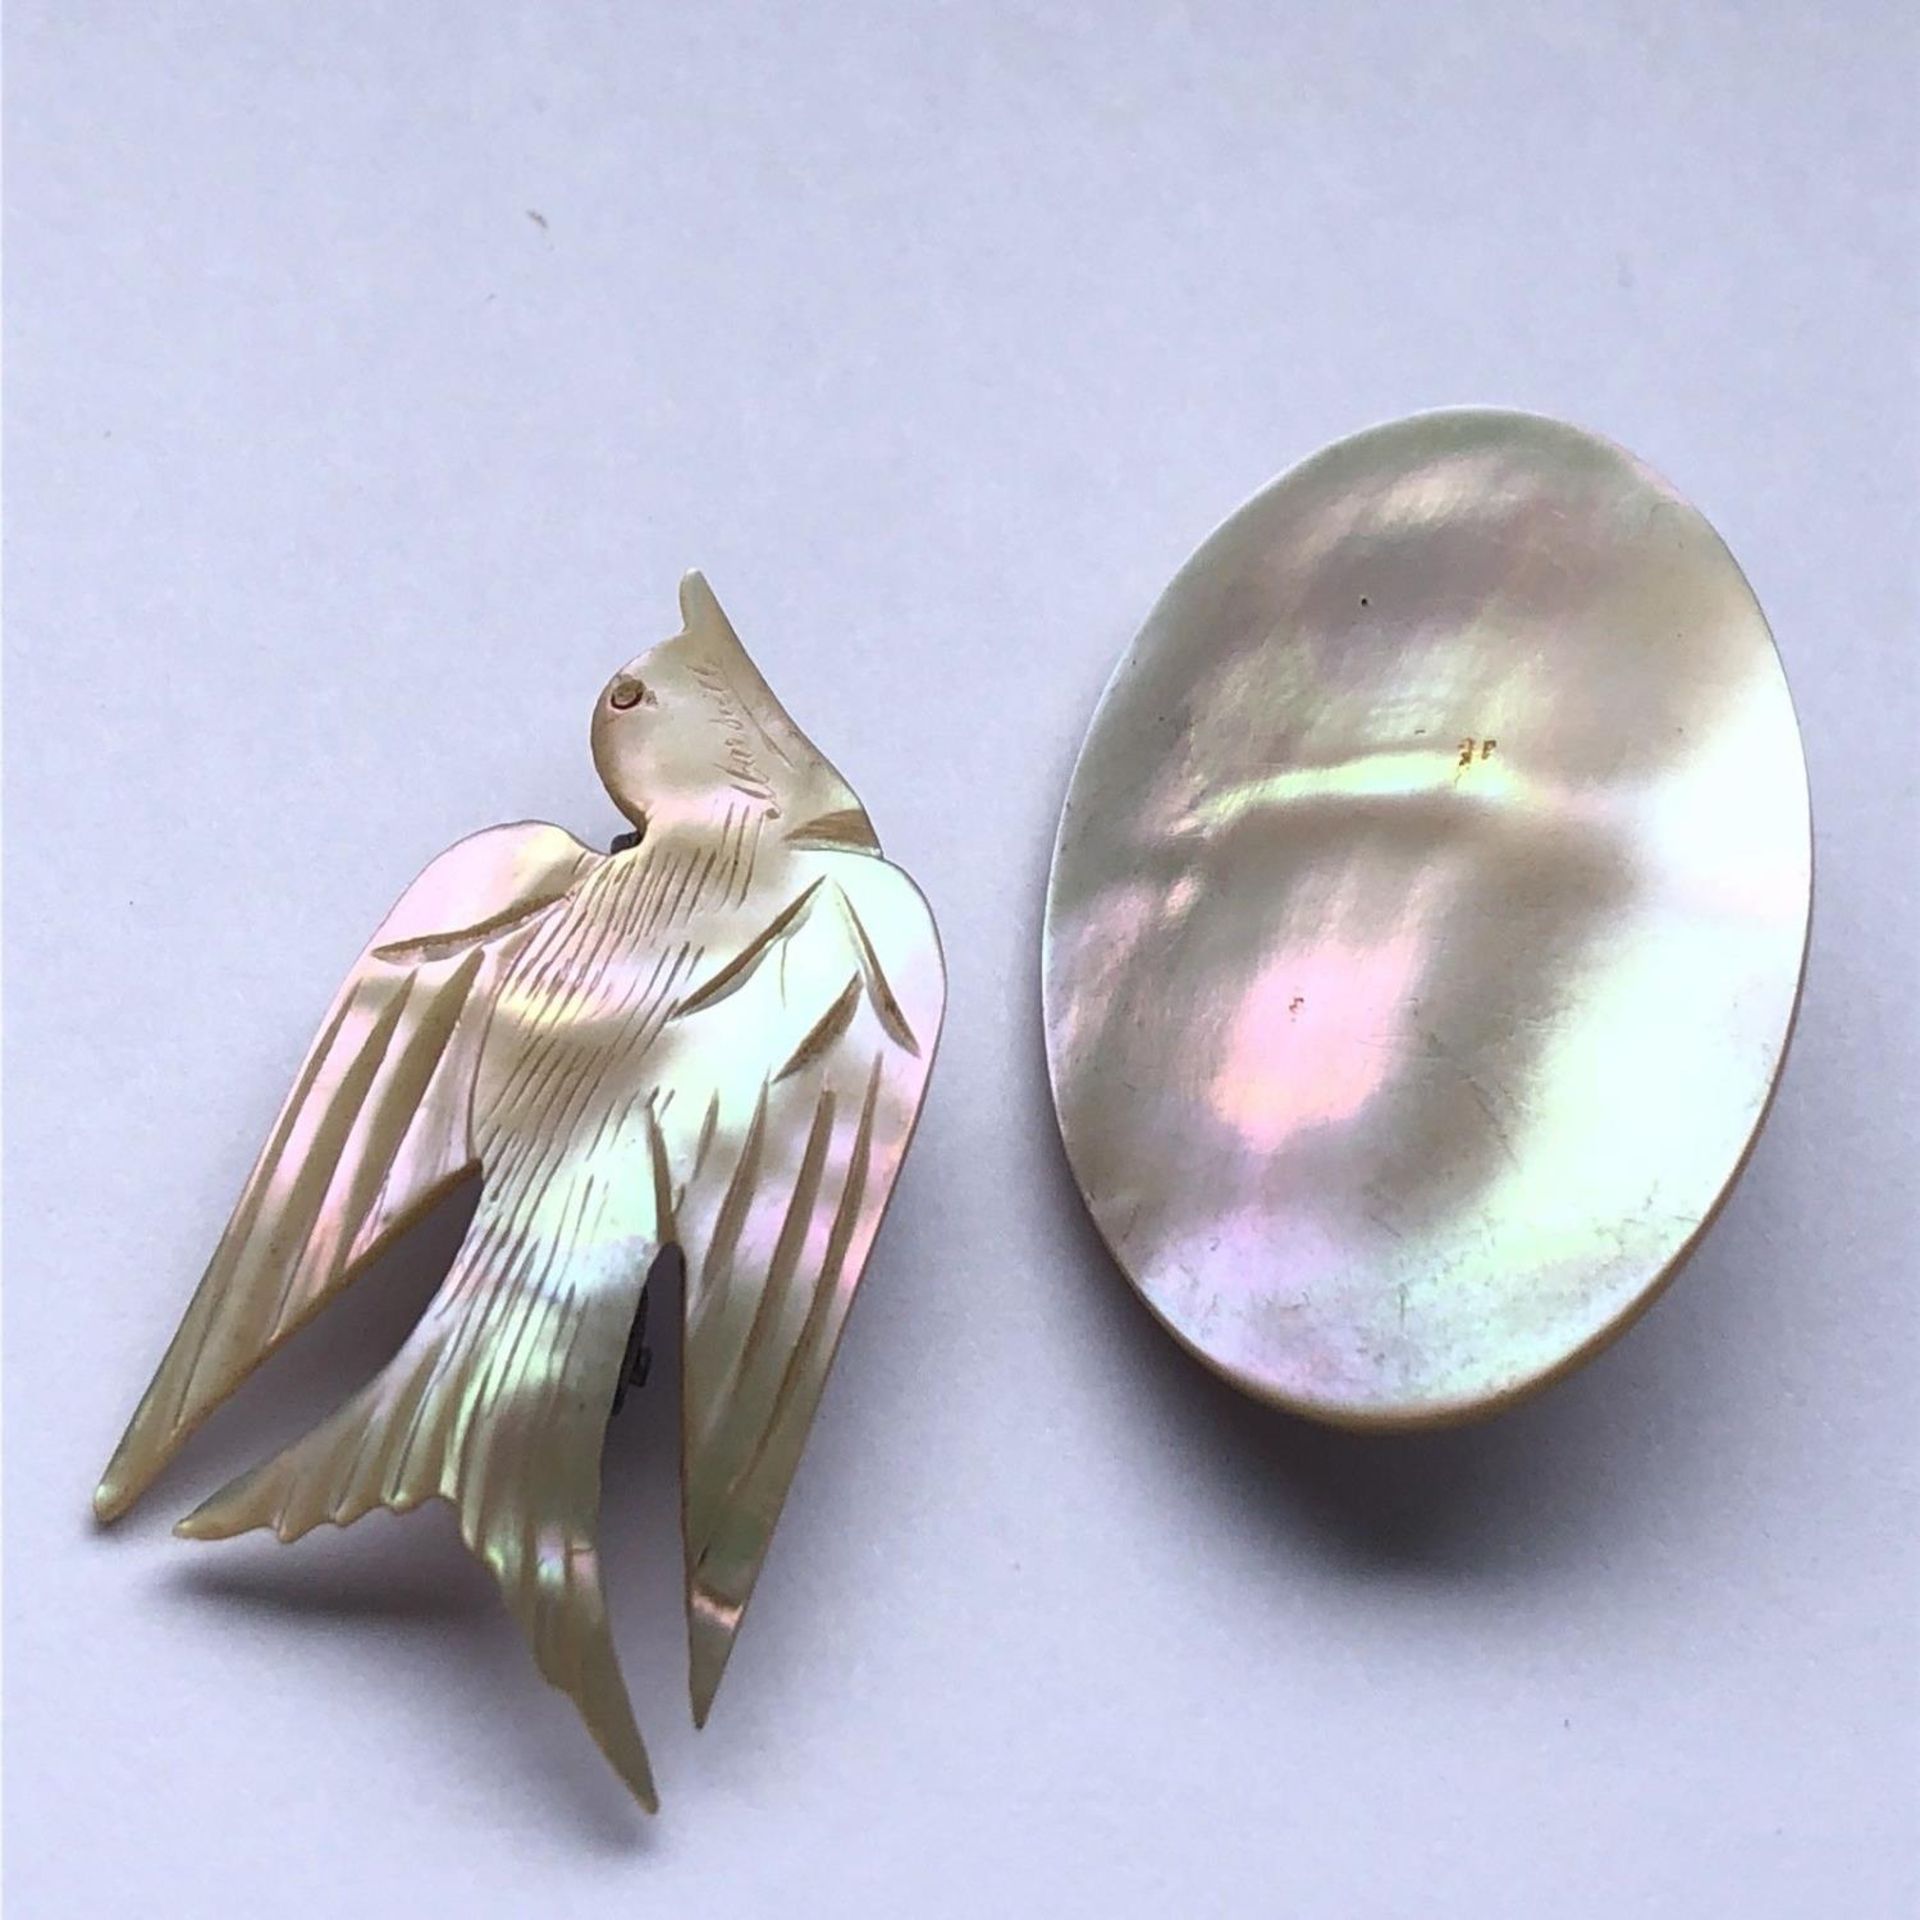 2 x Old French Shell Brooches - The Bird Marked Marseille - Image 3 of 5